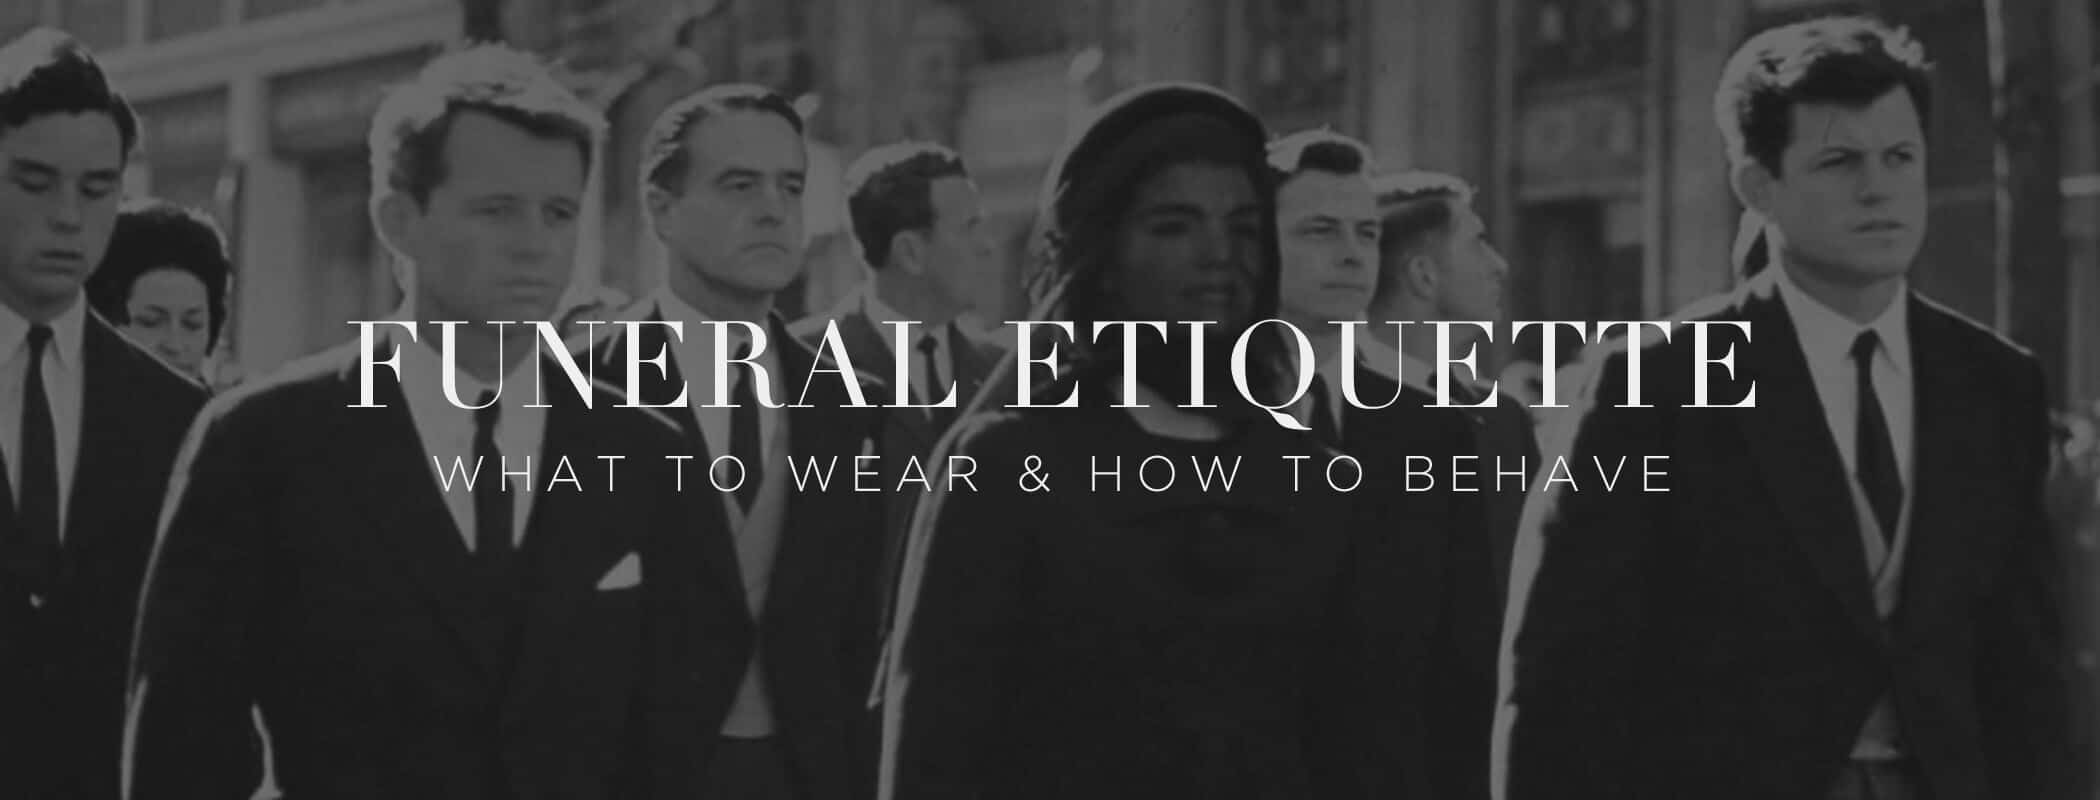 Funeral Etiquette What To Wear What To Do Gentleman S Gazette,How Long Does It Take To Steam Brussel Sprouts In The Microwave